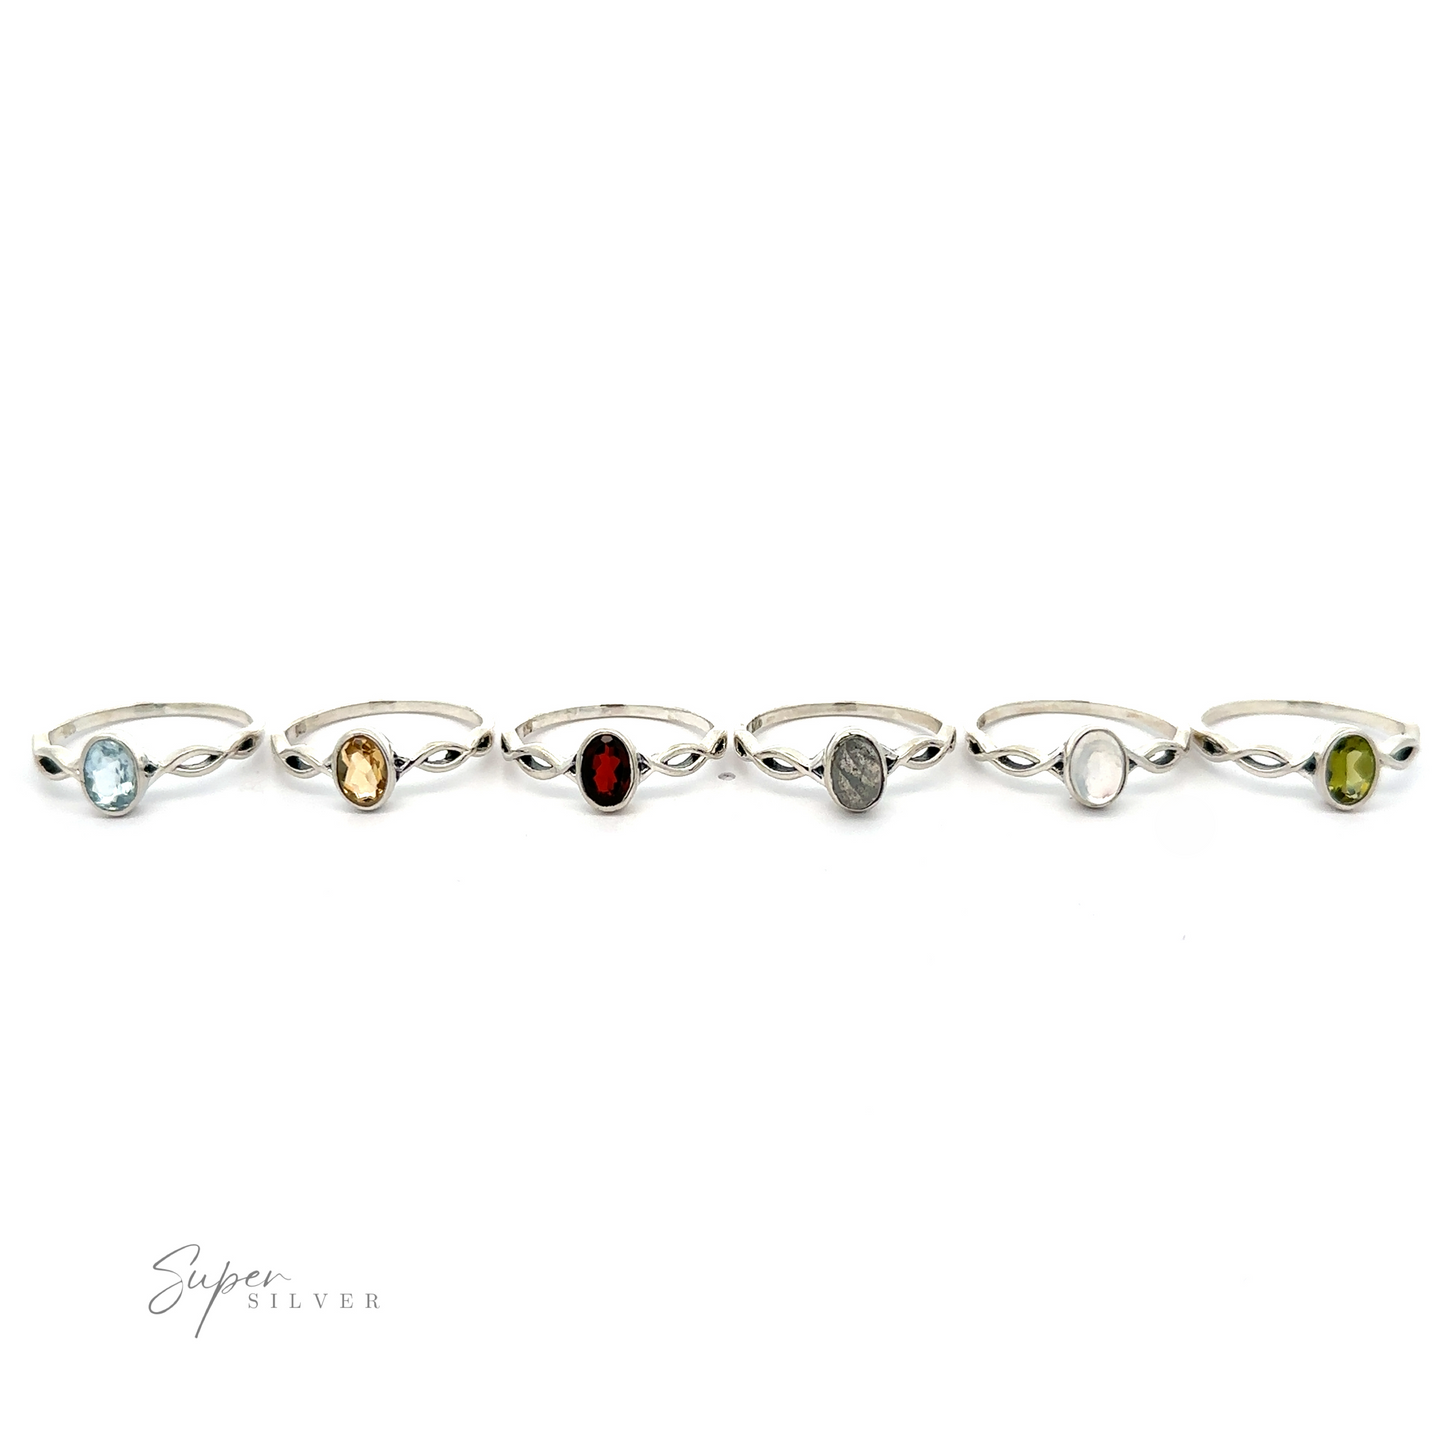 A line of seven Dainty Oval Gemstone Rings with Twisted Bands, featuring sparkling oval gemstones, isolated on a white background.